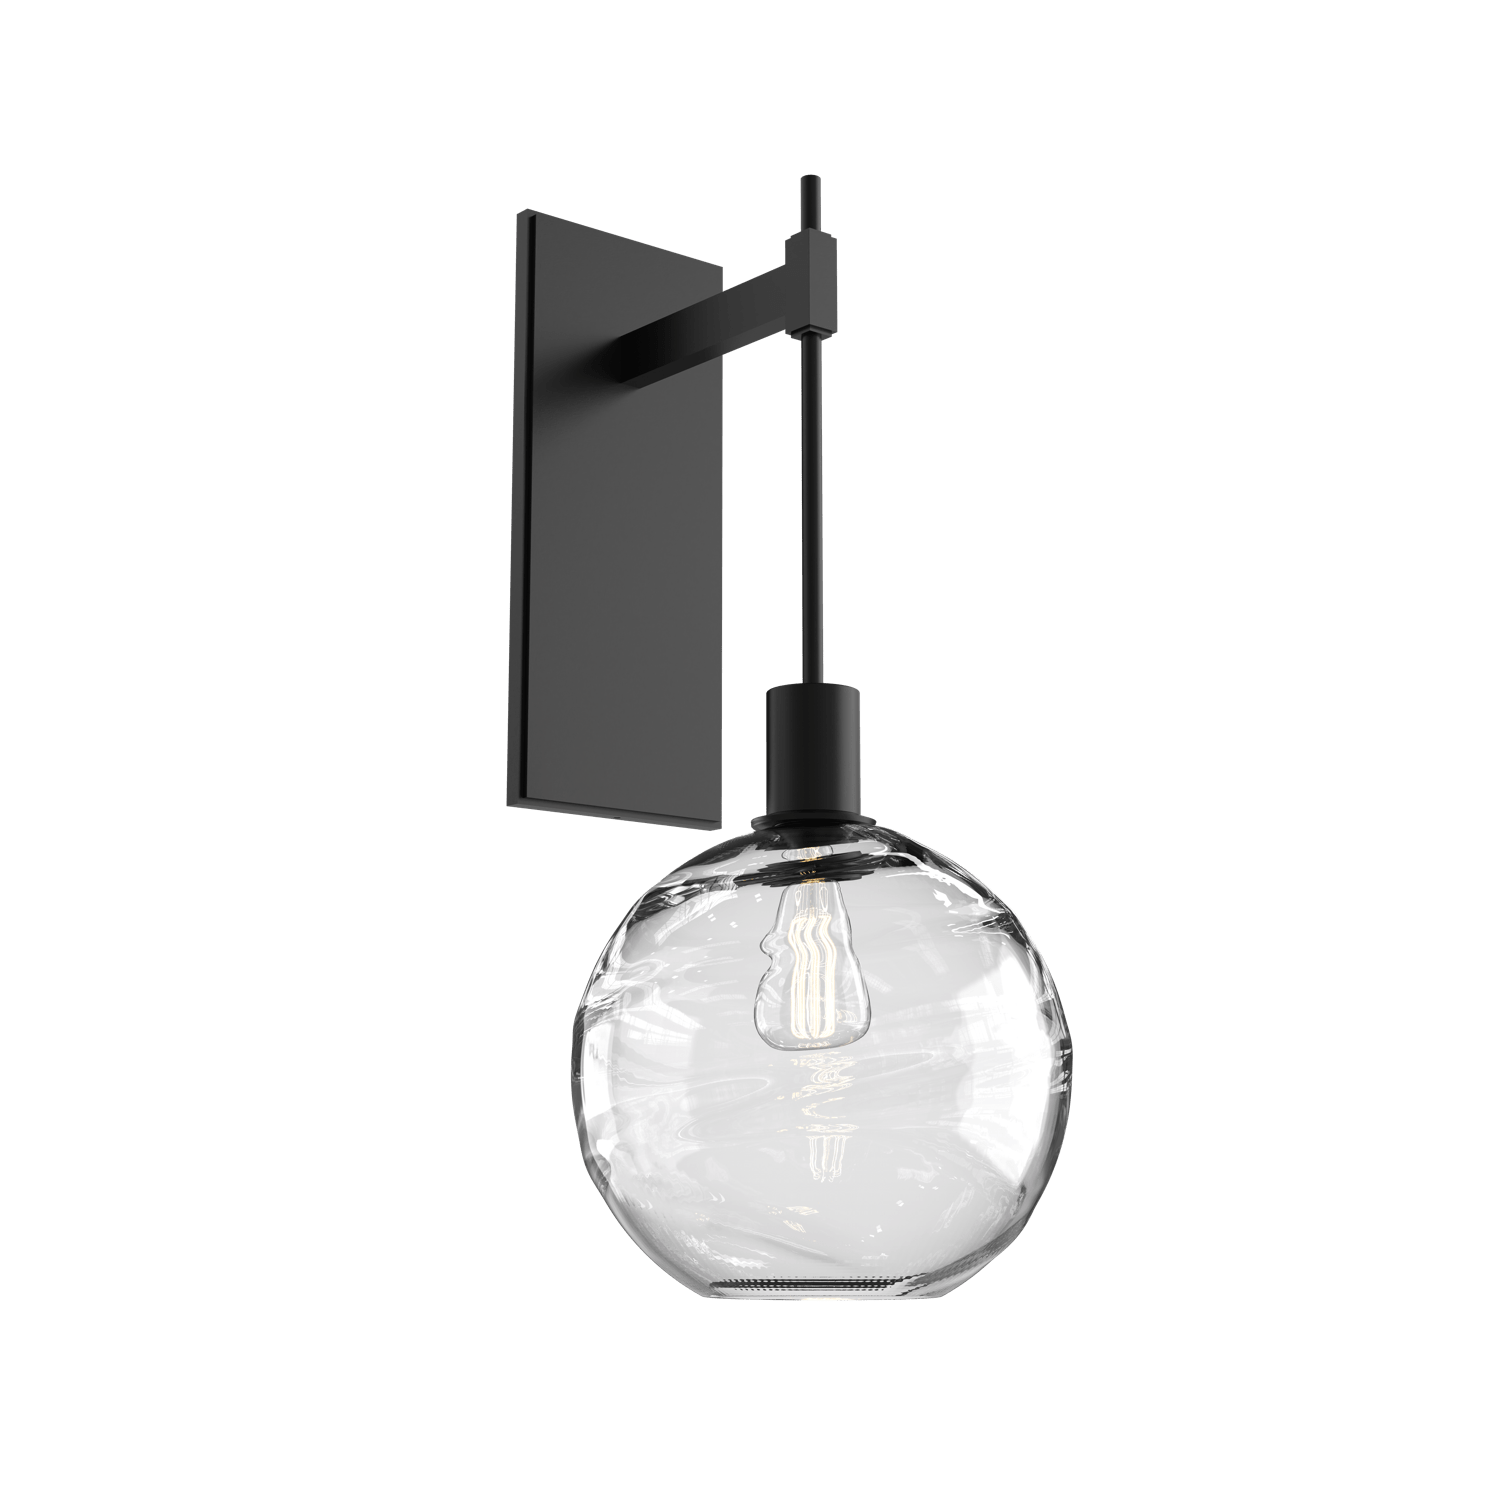 IDB0047-22-MB-OC-Hammerton-Studio-Optic-Blown-Glass-Terra-tempo-wall-sconce-with-matte-black-finish-and-optic-clear-blown-glass-shades-and-incandescent-lamping